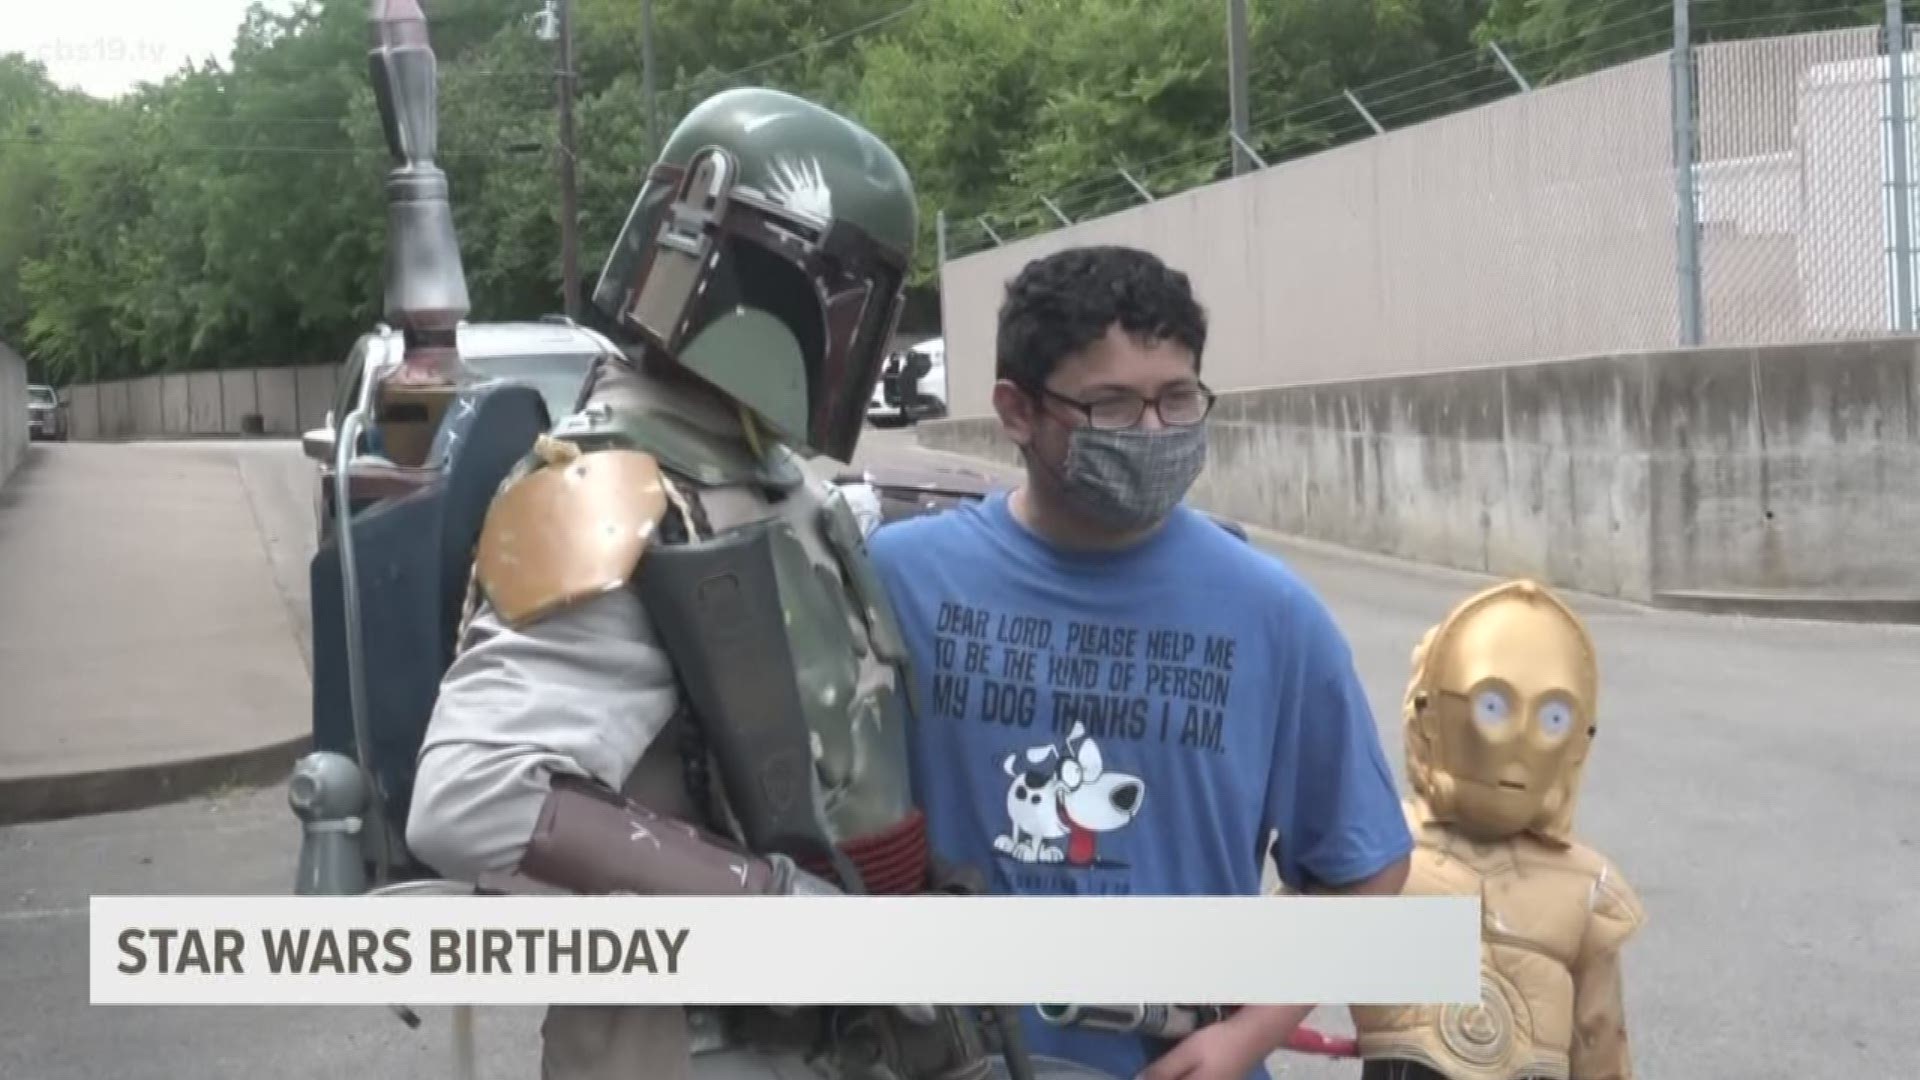 16 year old Jair Egan celebrated his birthday with officers dressed as Star Wars characters